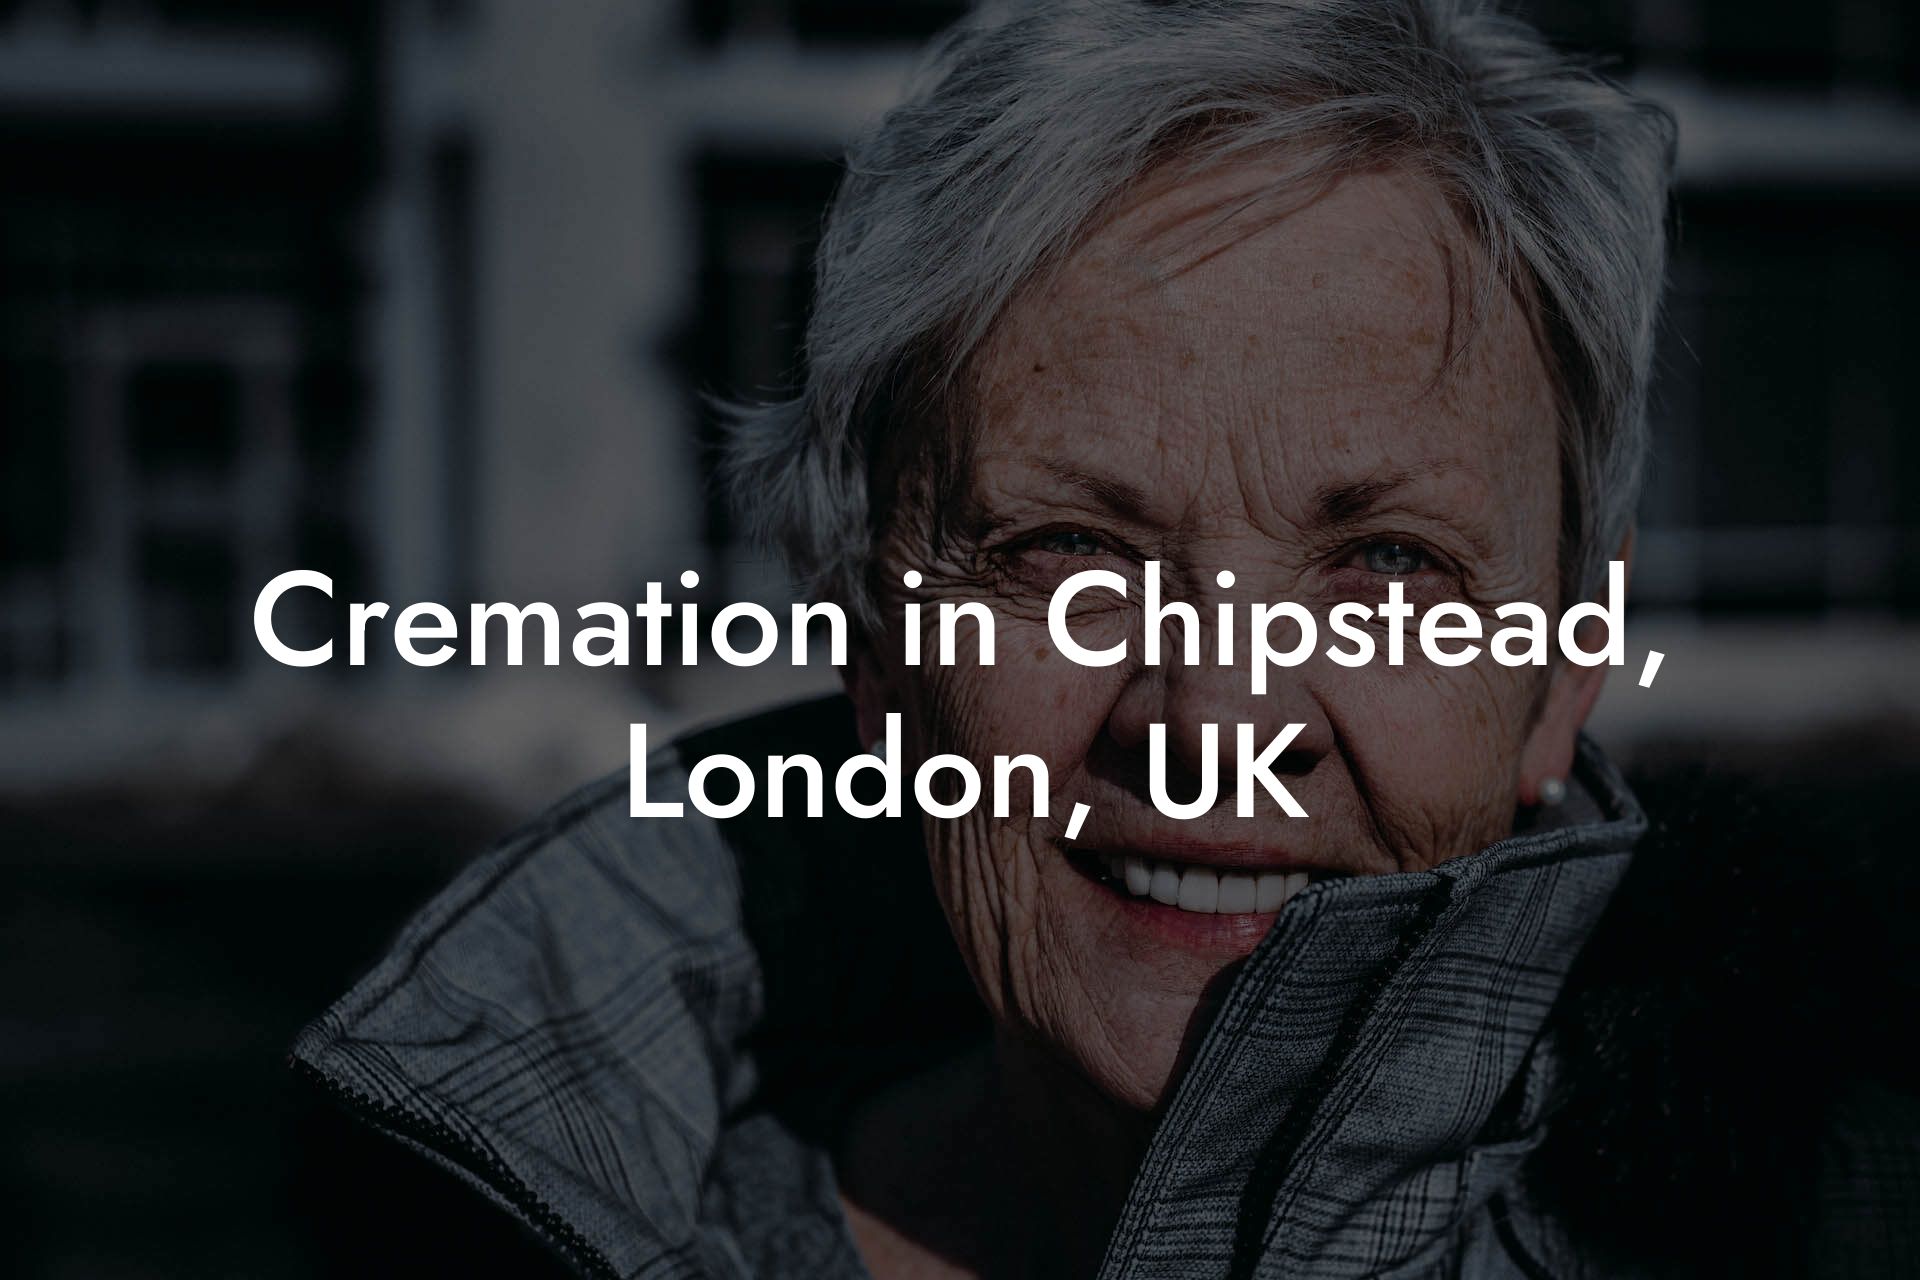 Cremation in Chipstead, London, UK